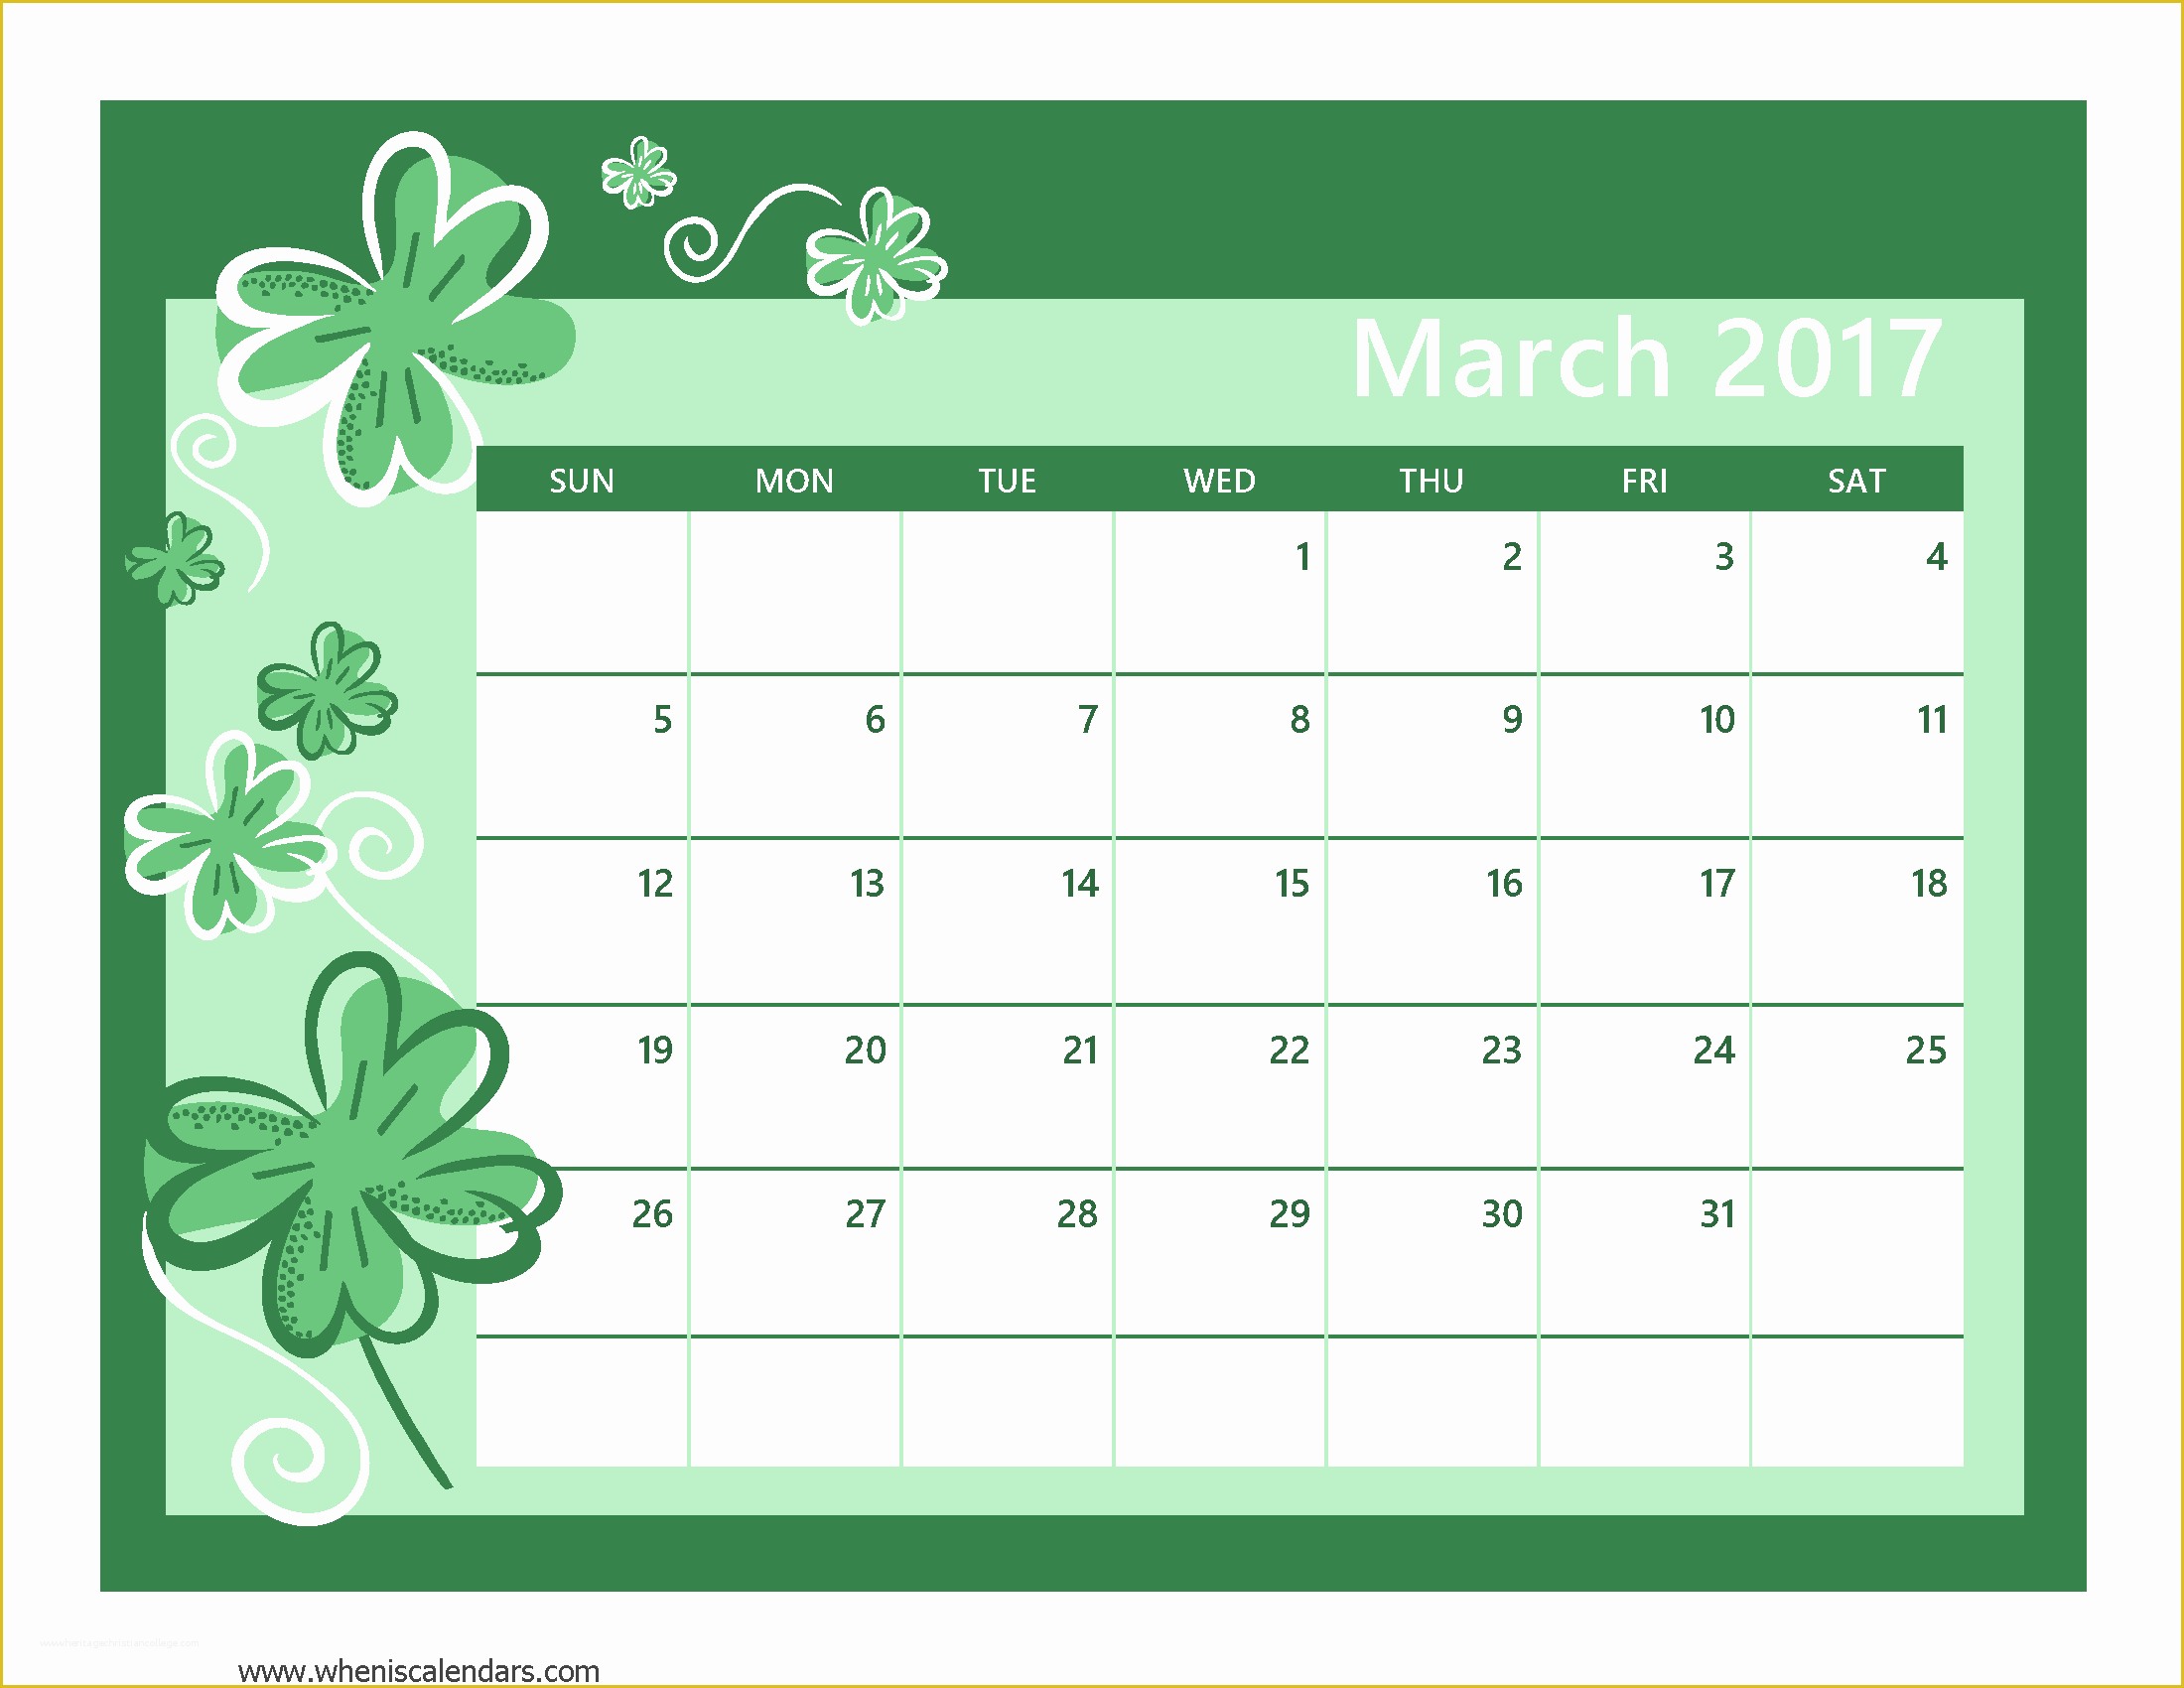 Holiday Schedule Template Free Of March 2017 Calendar Printable with Holidays